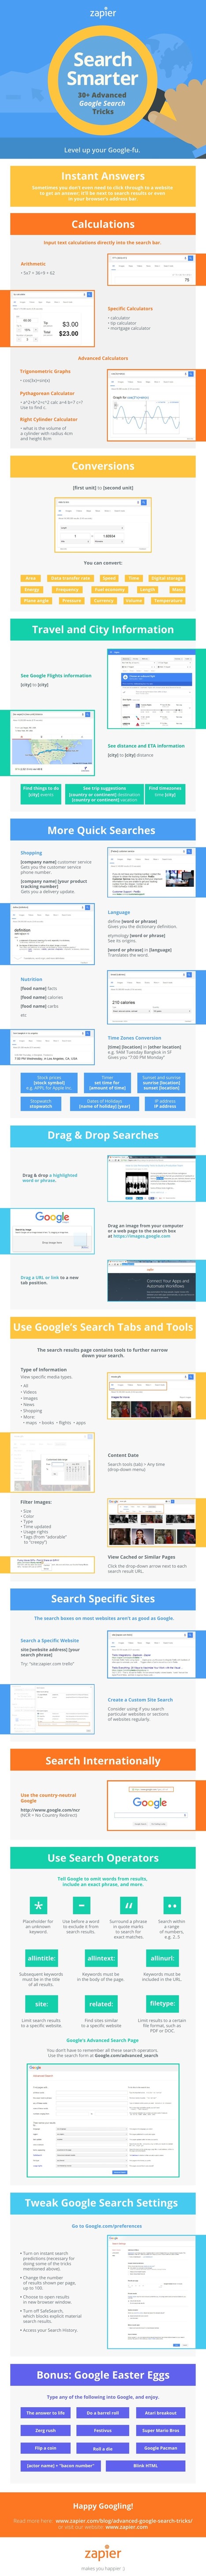 A New Infographic Featuring 30+ Practical Google Search Tips ~ Educational Technology and Mobile Learning | Distance Learning, mLearning, Digital Education, Technology | Scoop.it